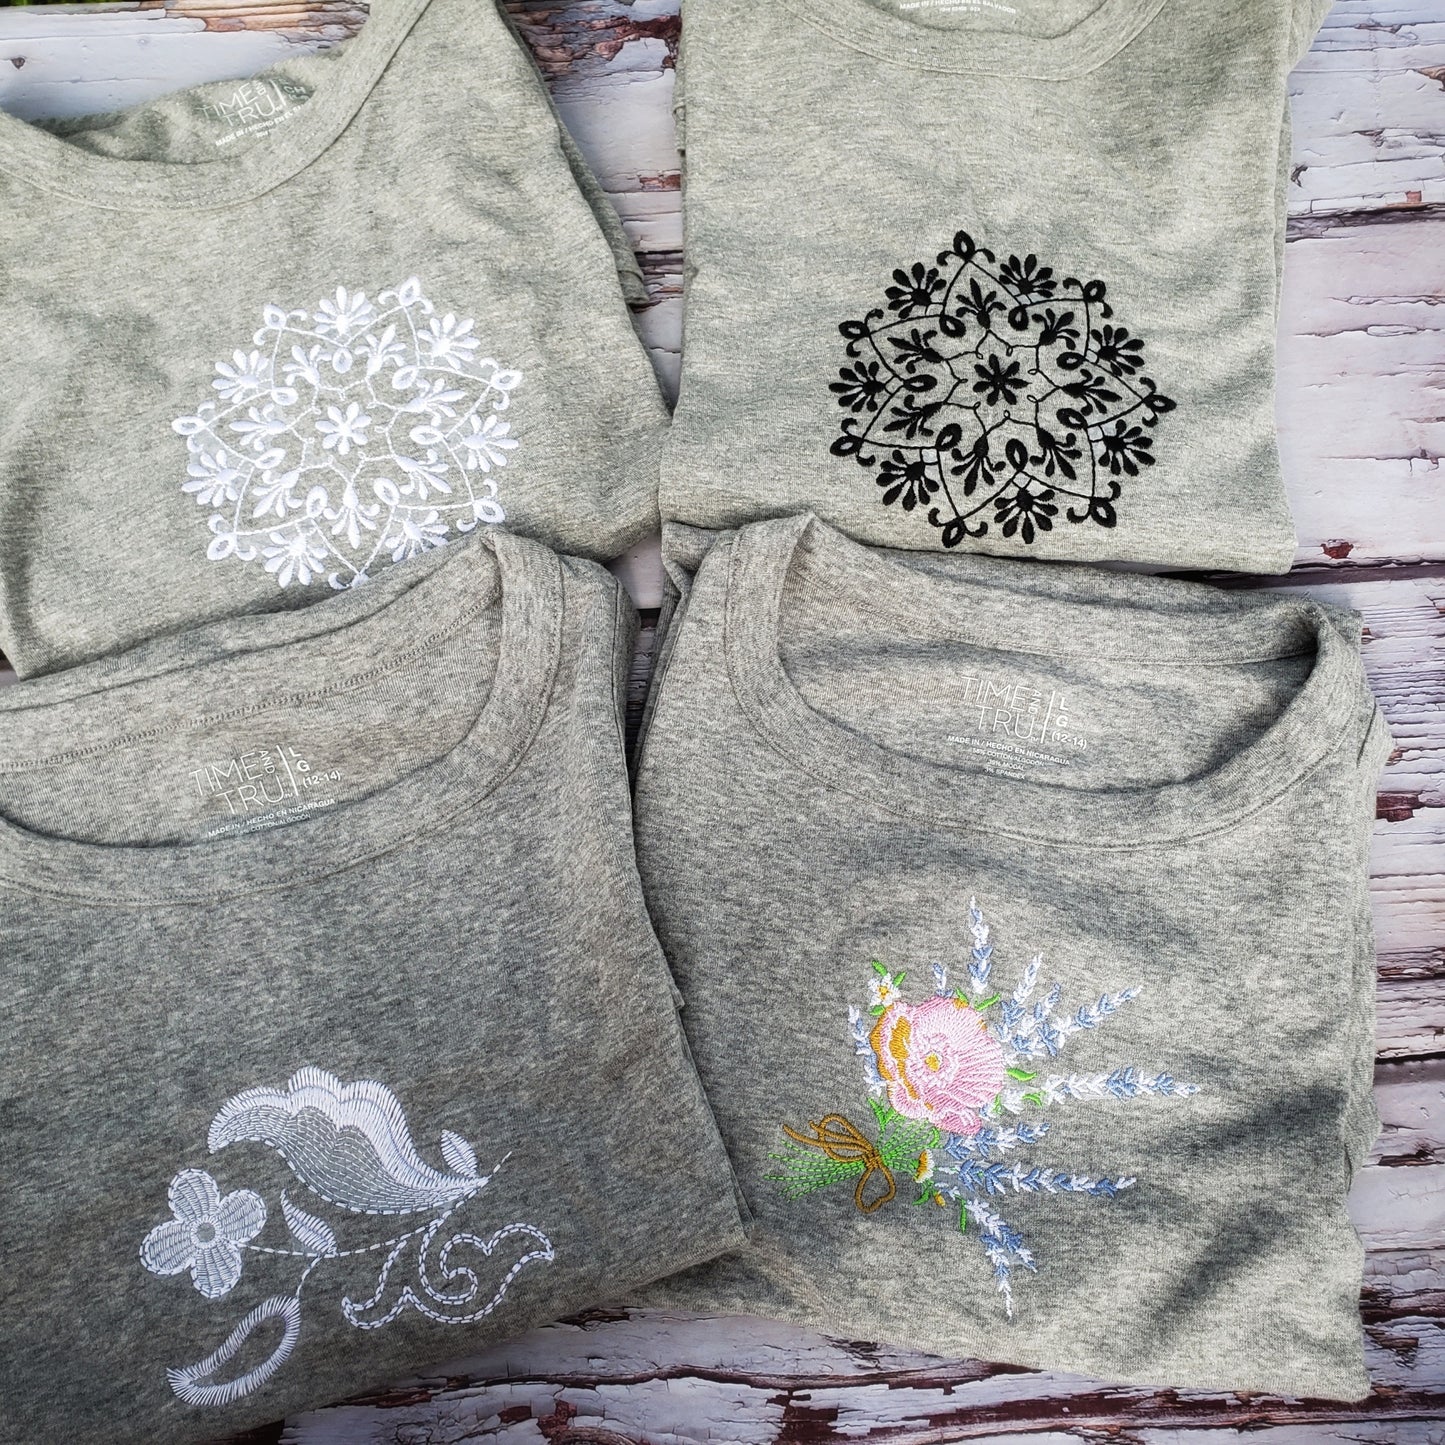 Embroidered Tshirts